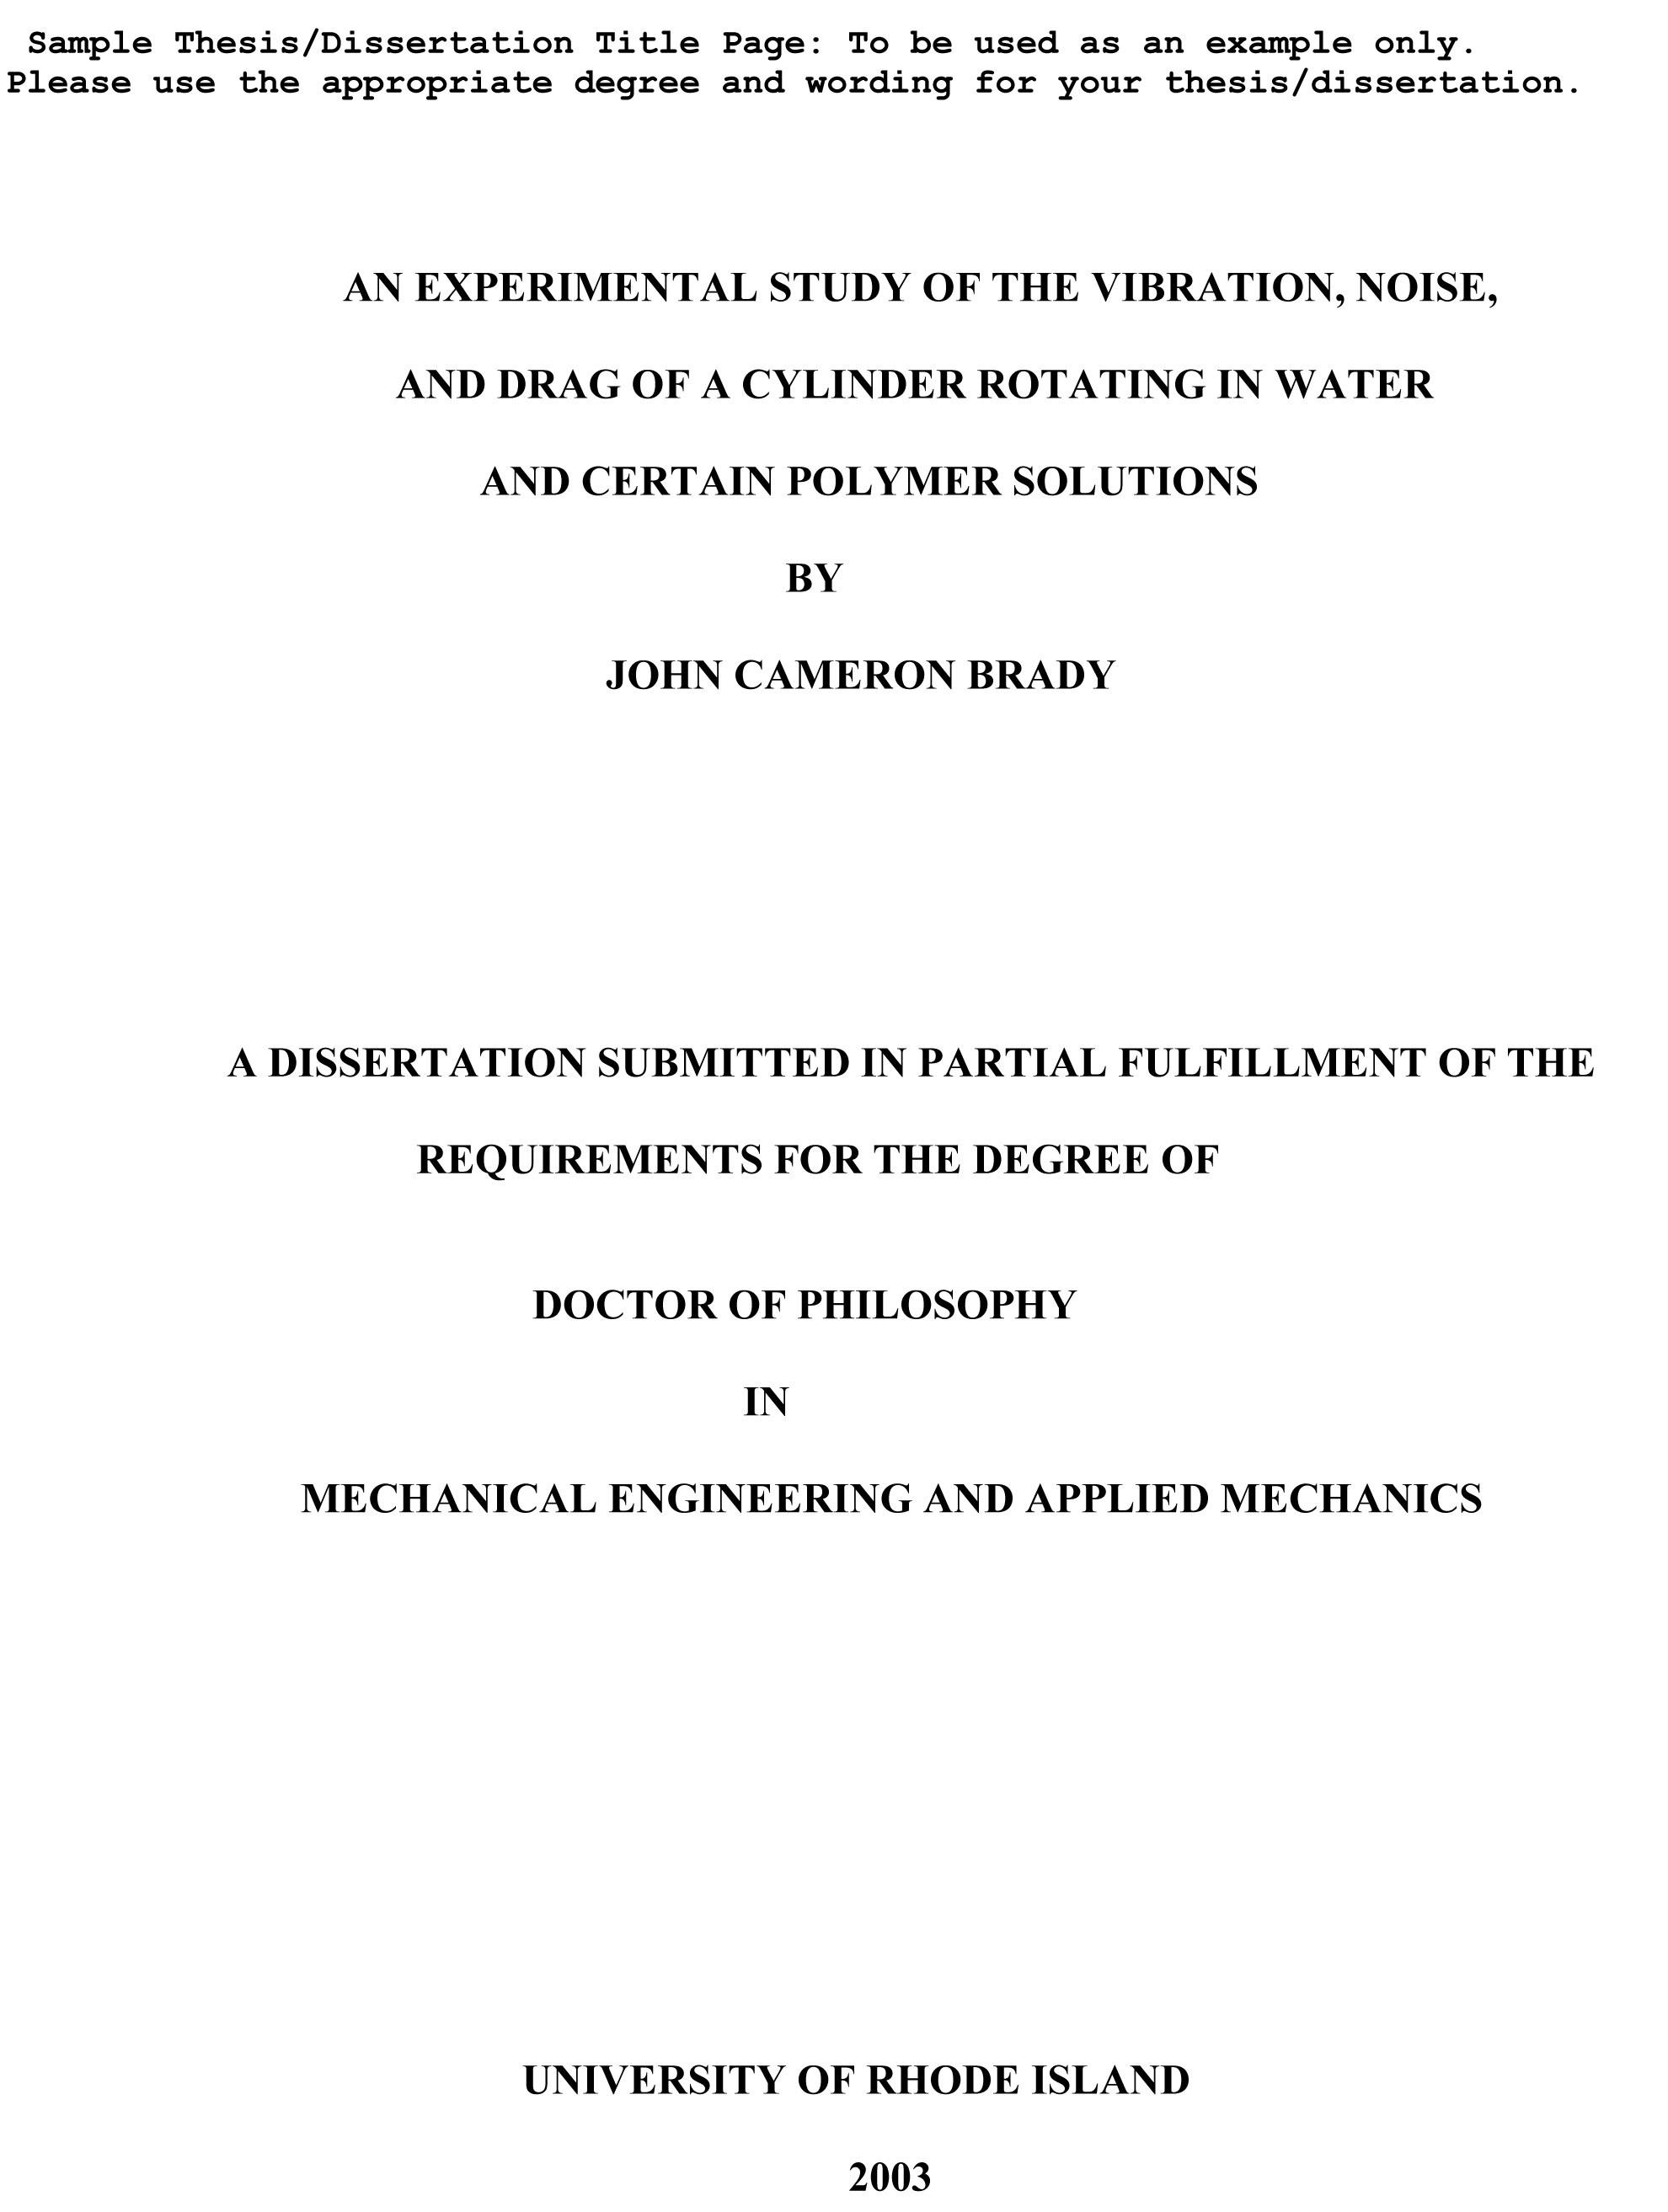 Sample of thesis title. The best thesis topic ideas for education.